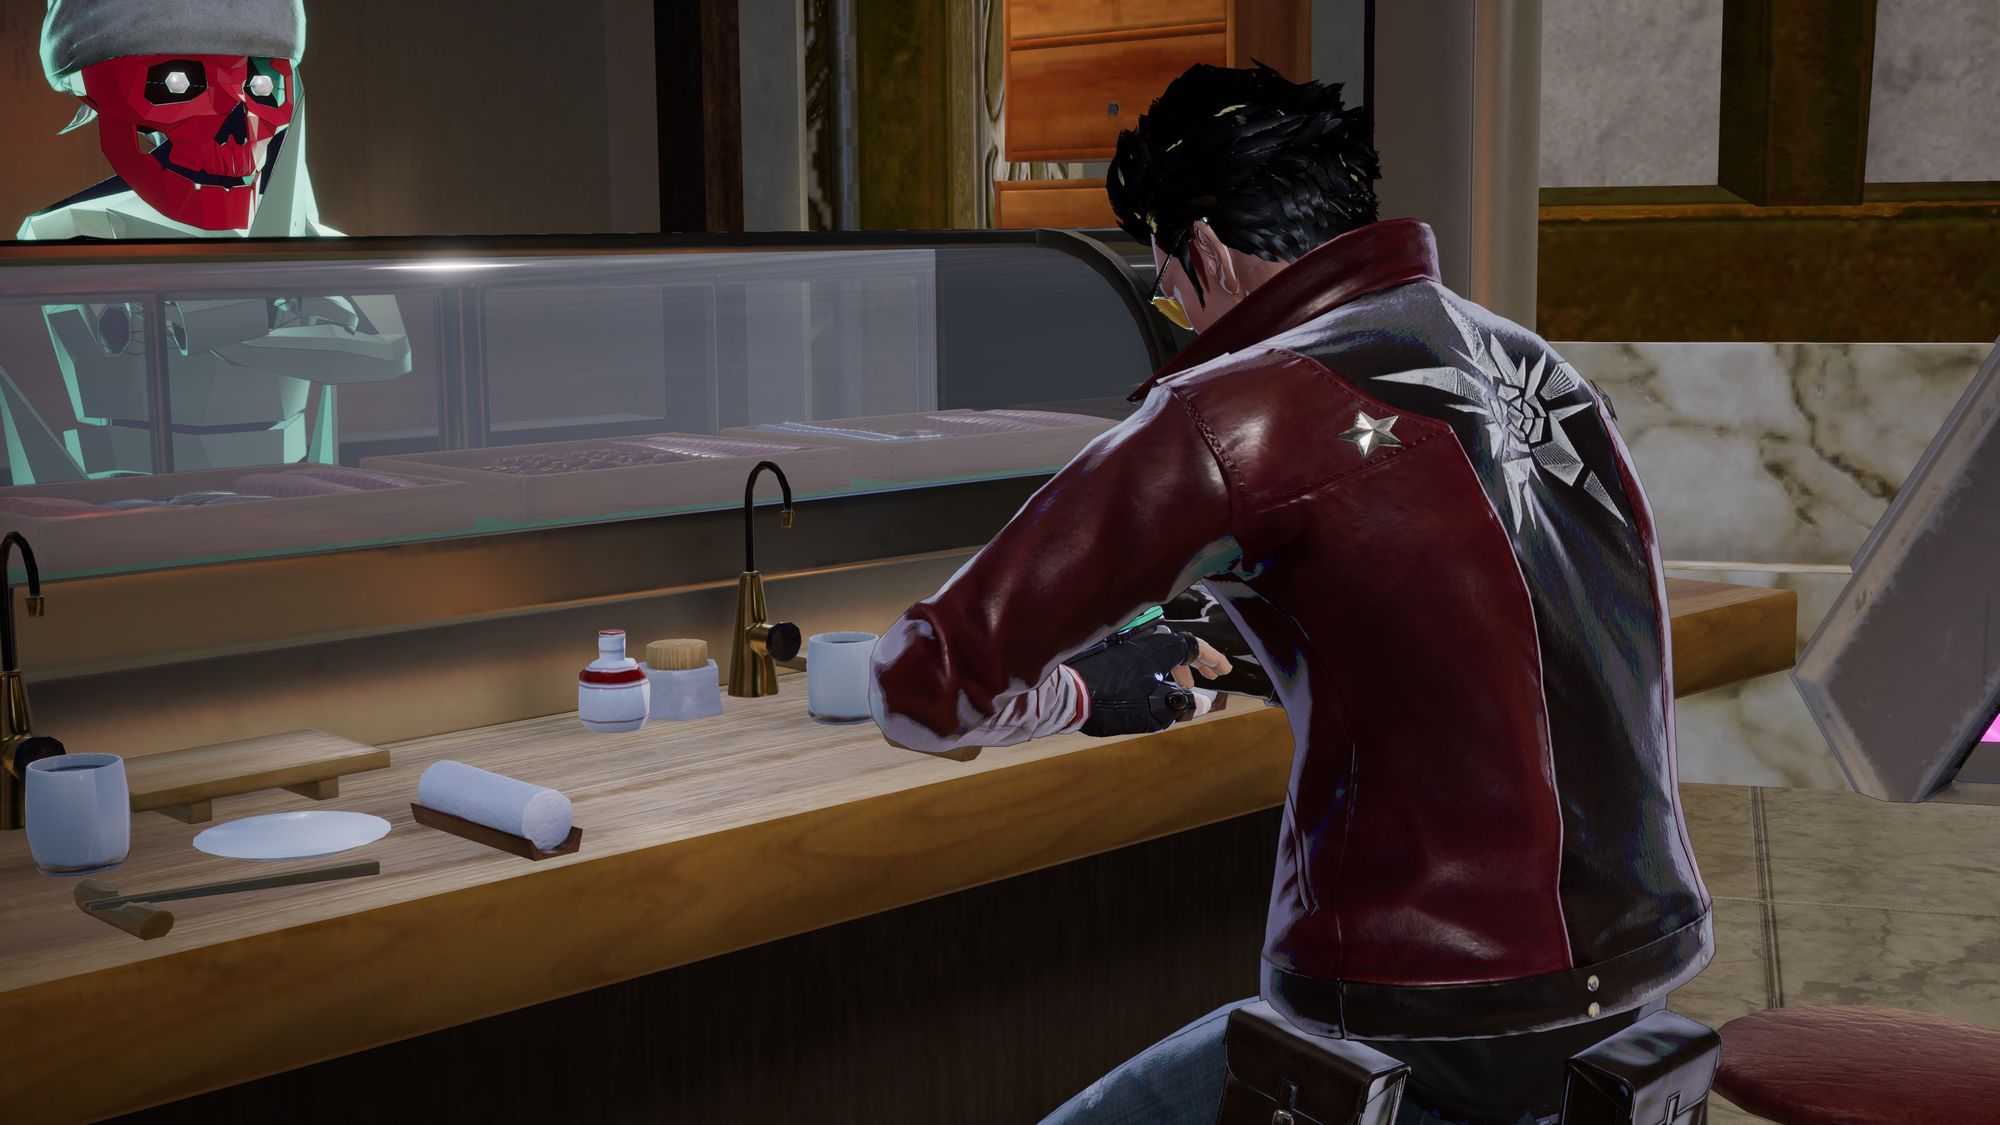 No More Heroes 3 for Xbox, PlayStation and PC - Review